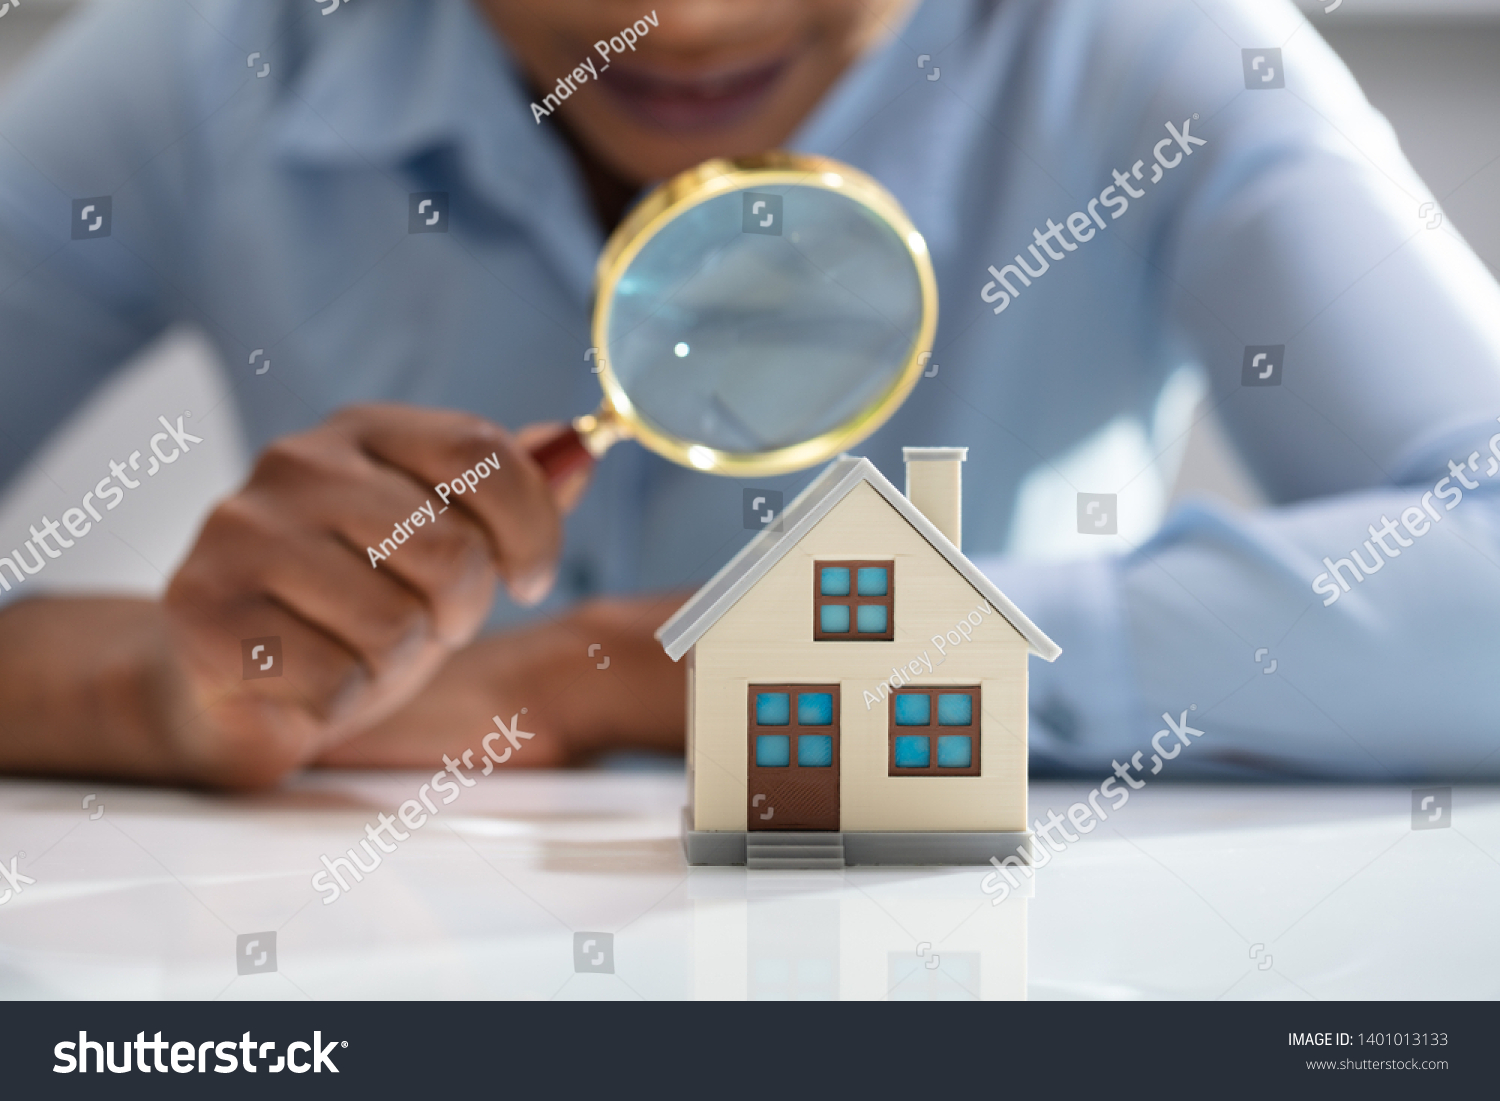 Close-up Of A Businesswoman's Hand Holding Magnifying Glass Over House Model Over Desk #1401013133